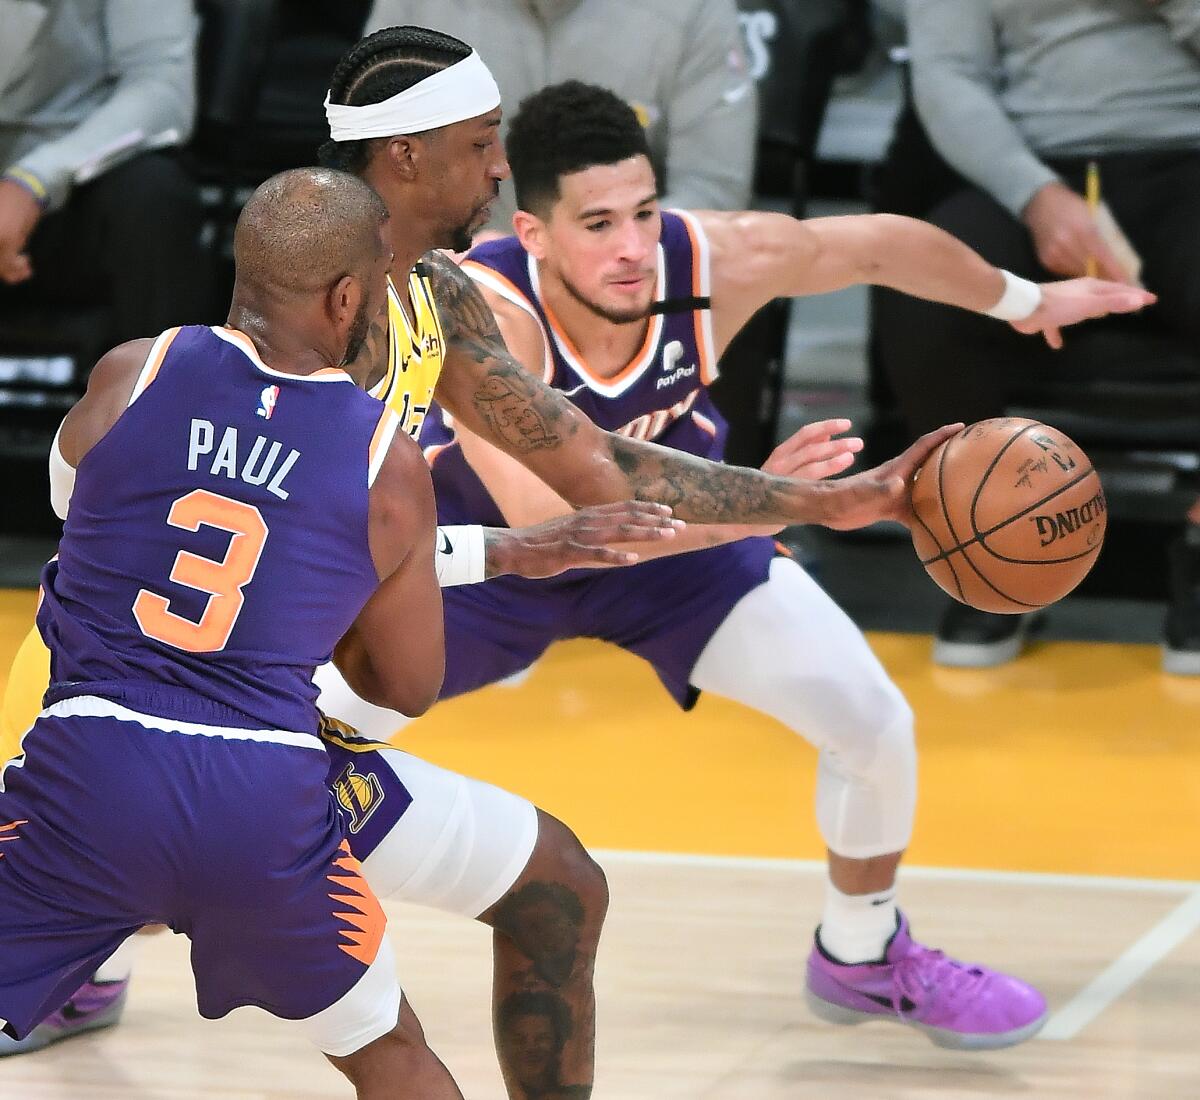 Lakers guard Kentavious Caldwell-Pope makes a steal between Suns guards Chris Paul and Devin Booker.